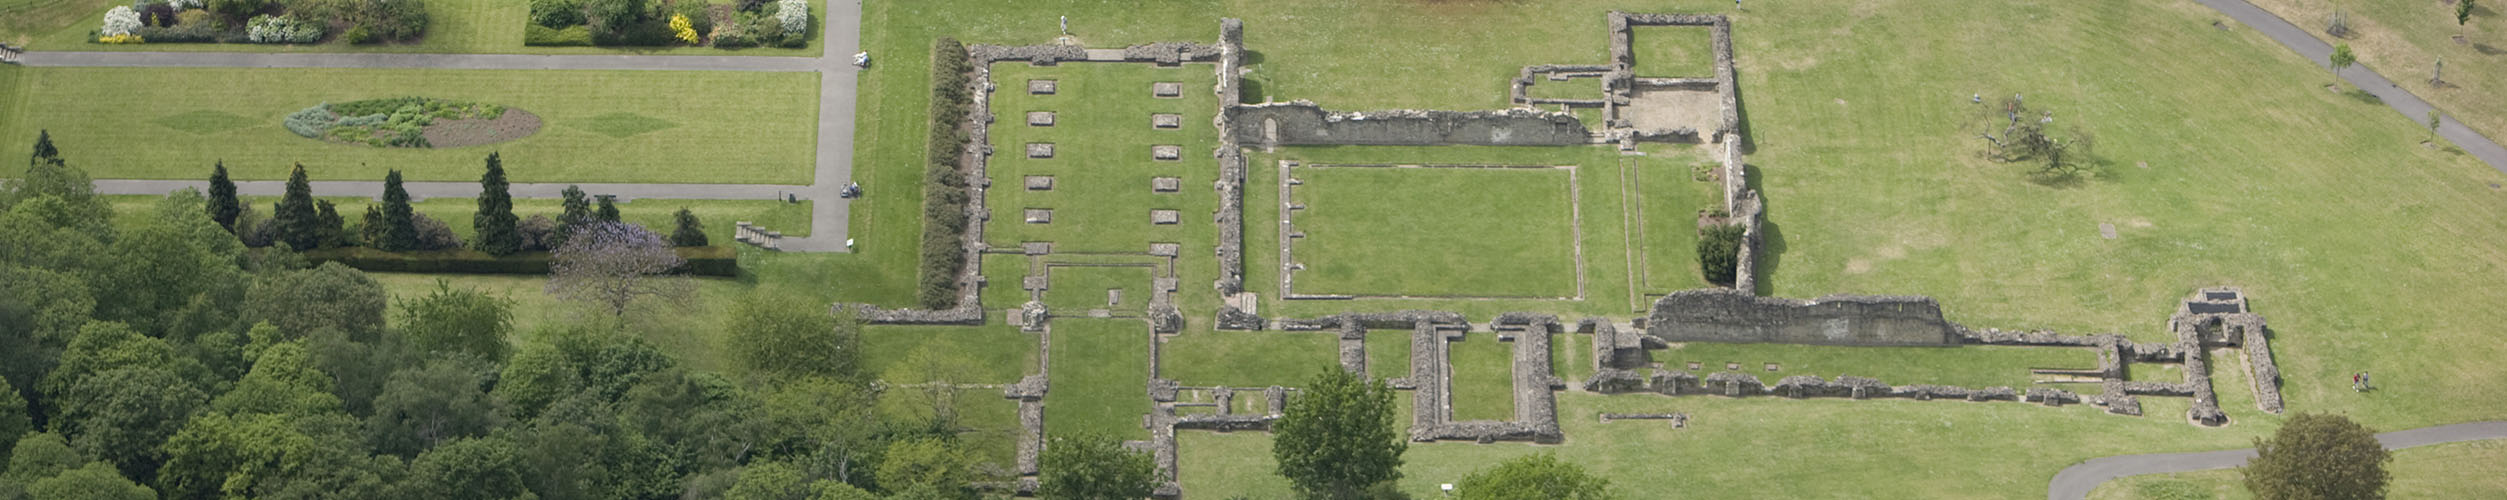 The ruins of Lesnes Abbey from the air